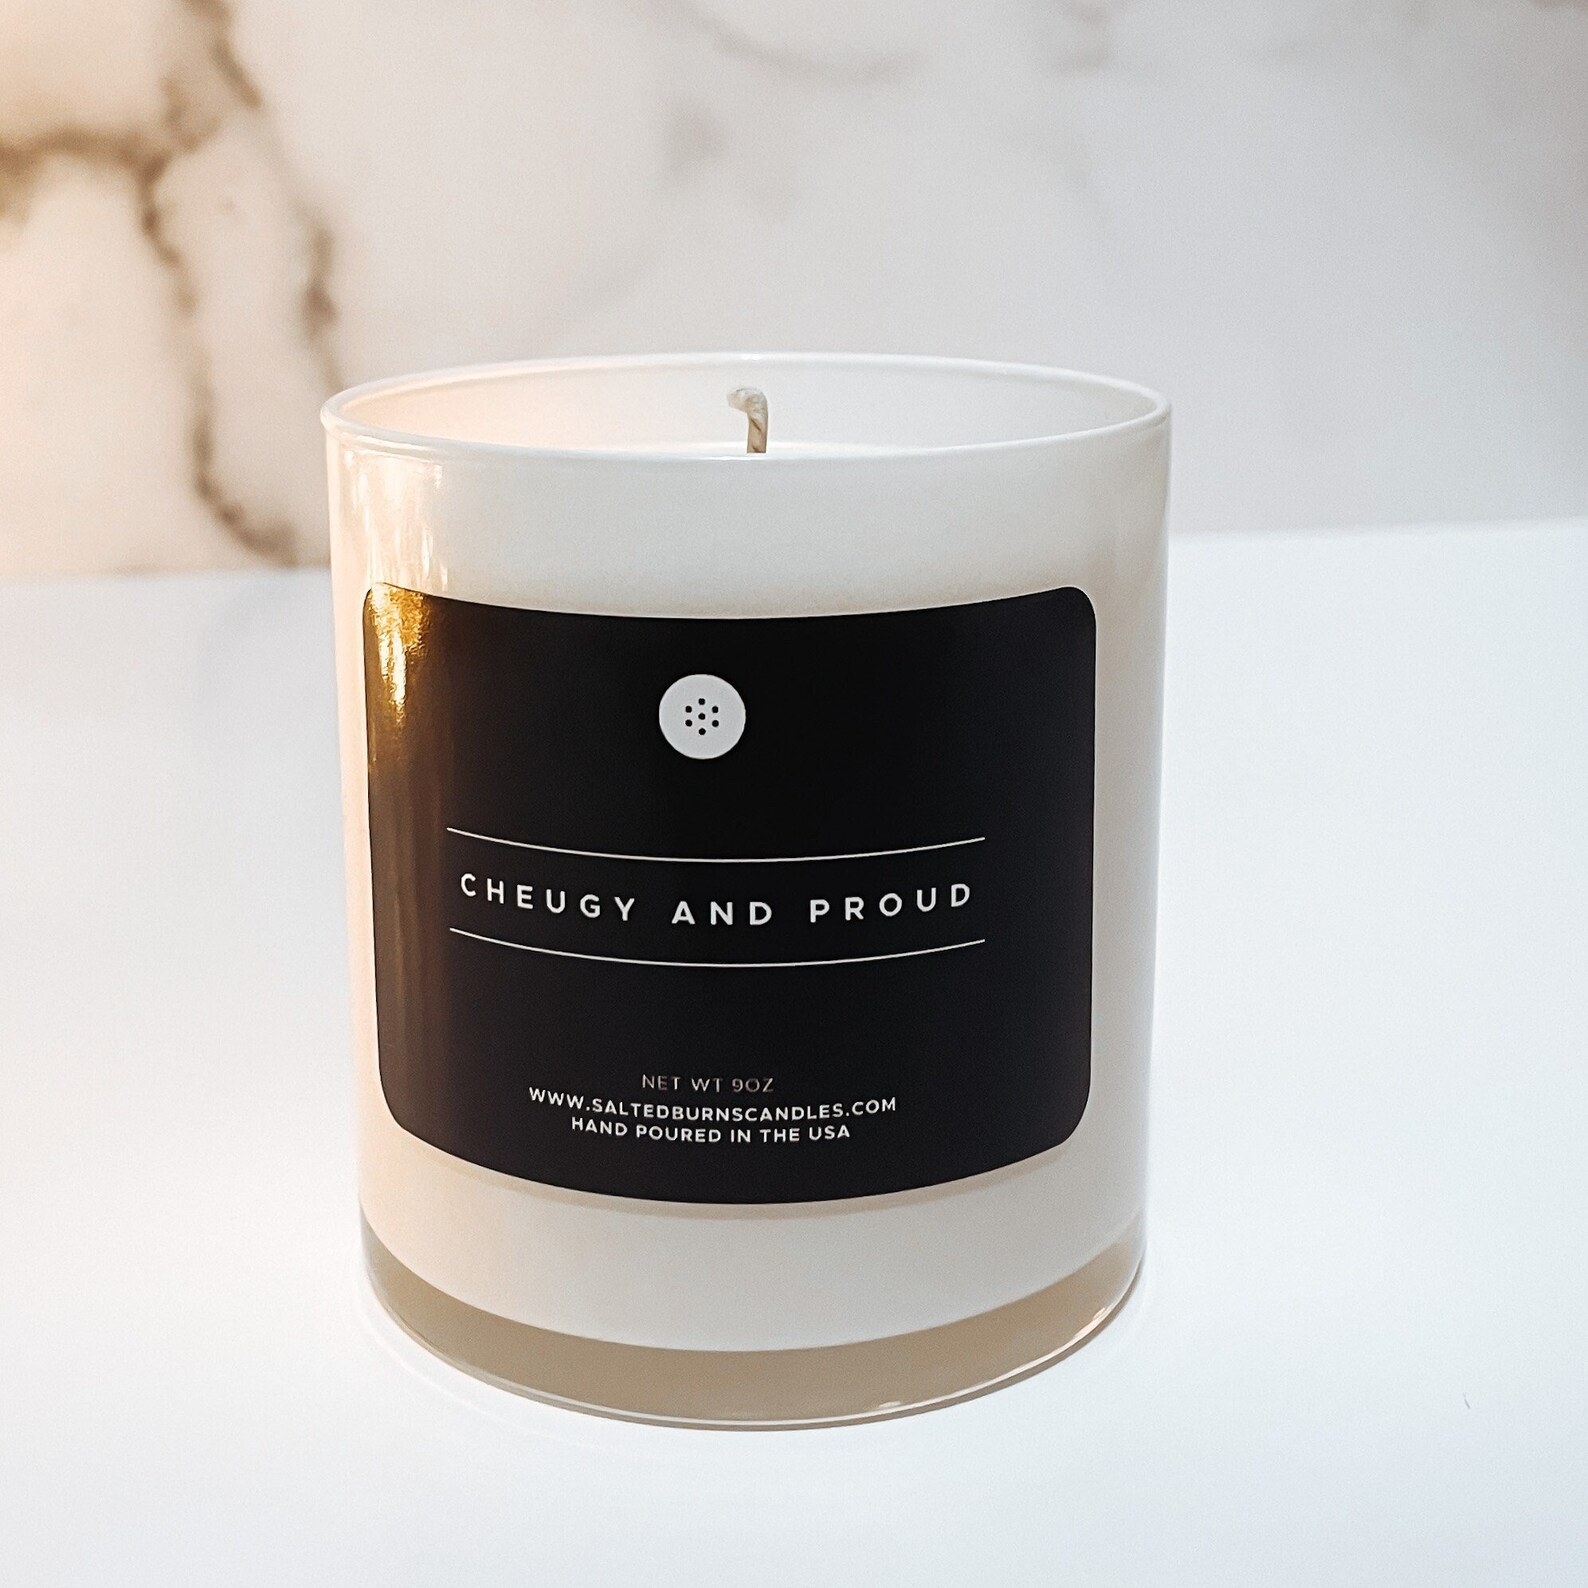 a white candle with a black label that says &quot;cheugy and proud&quot;